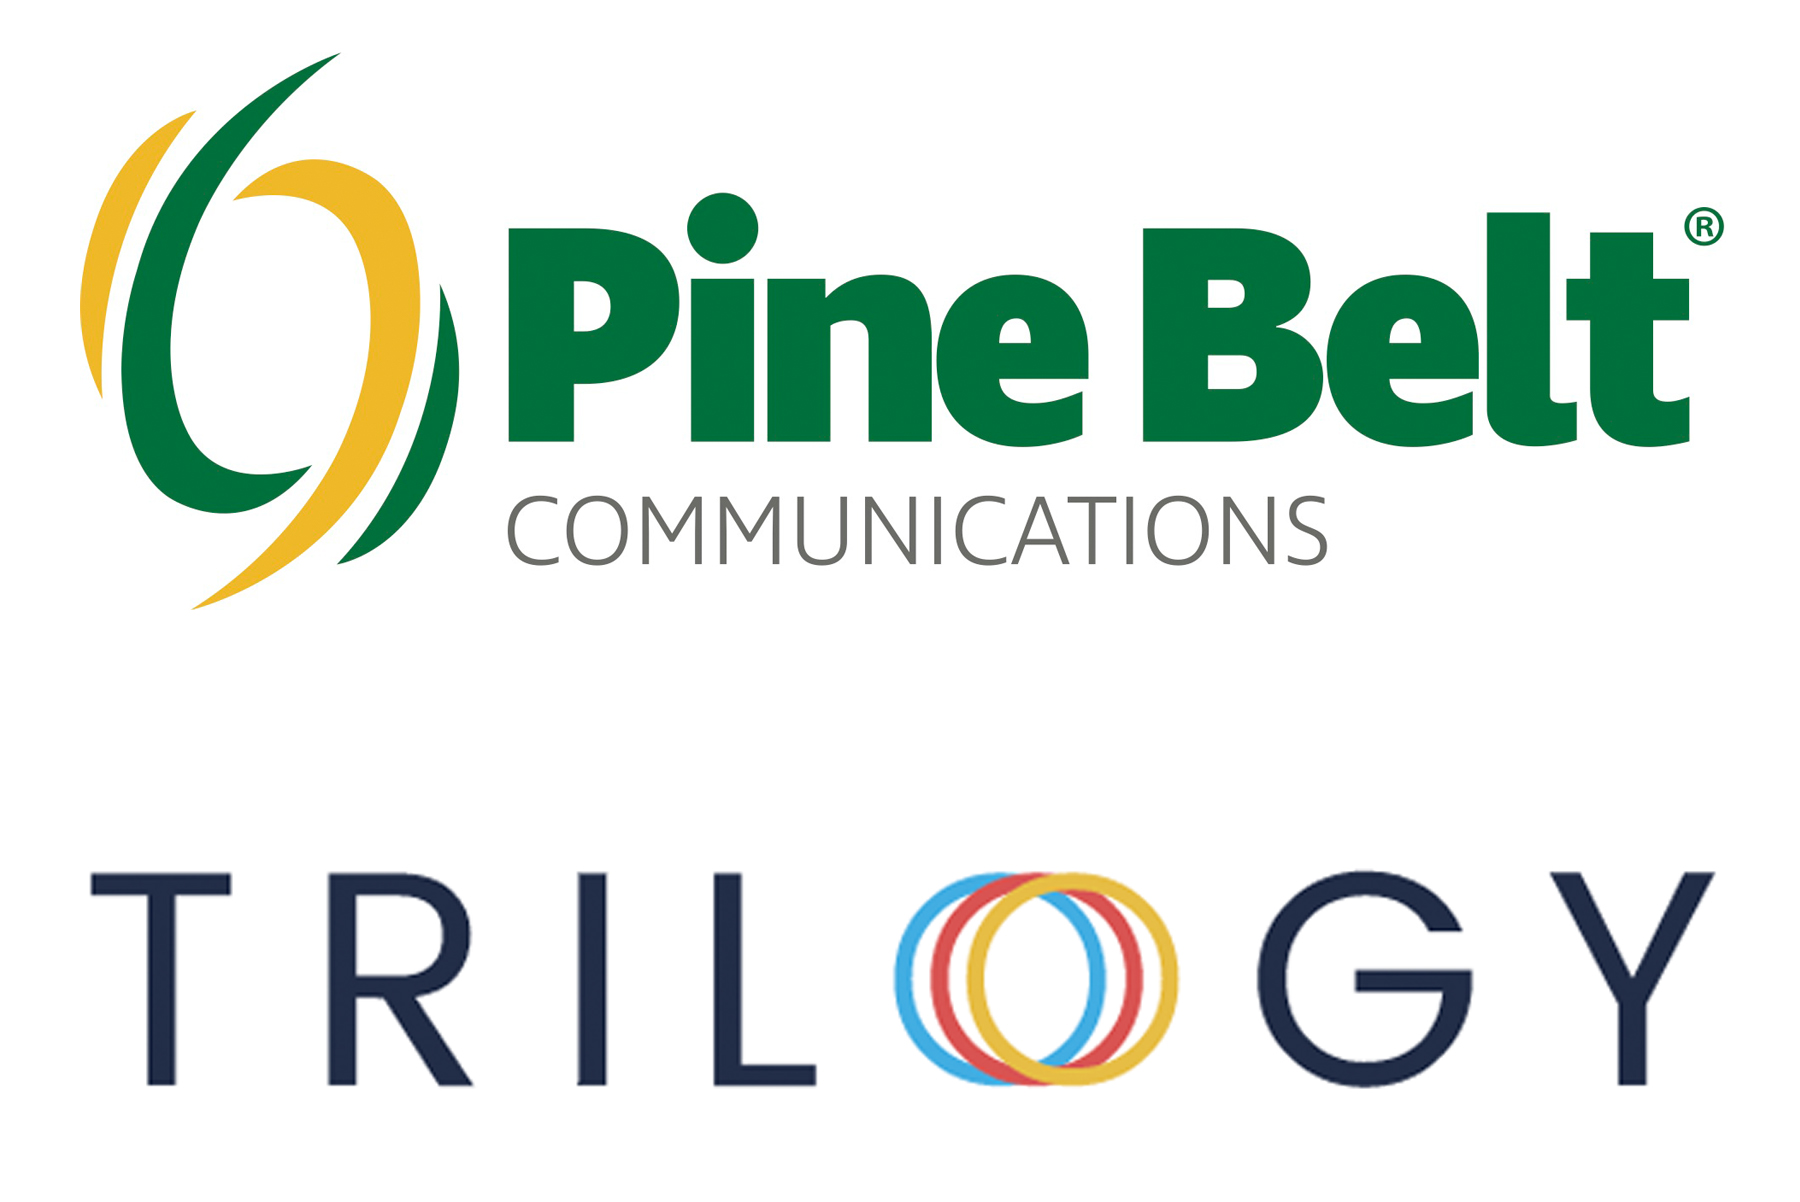 Pine Belt and Trilogy Extend Edge Cloud Computing Deep Into the Heart